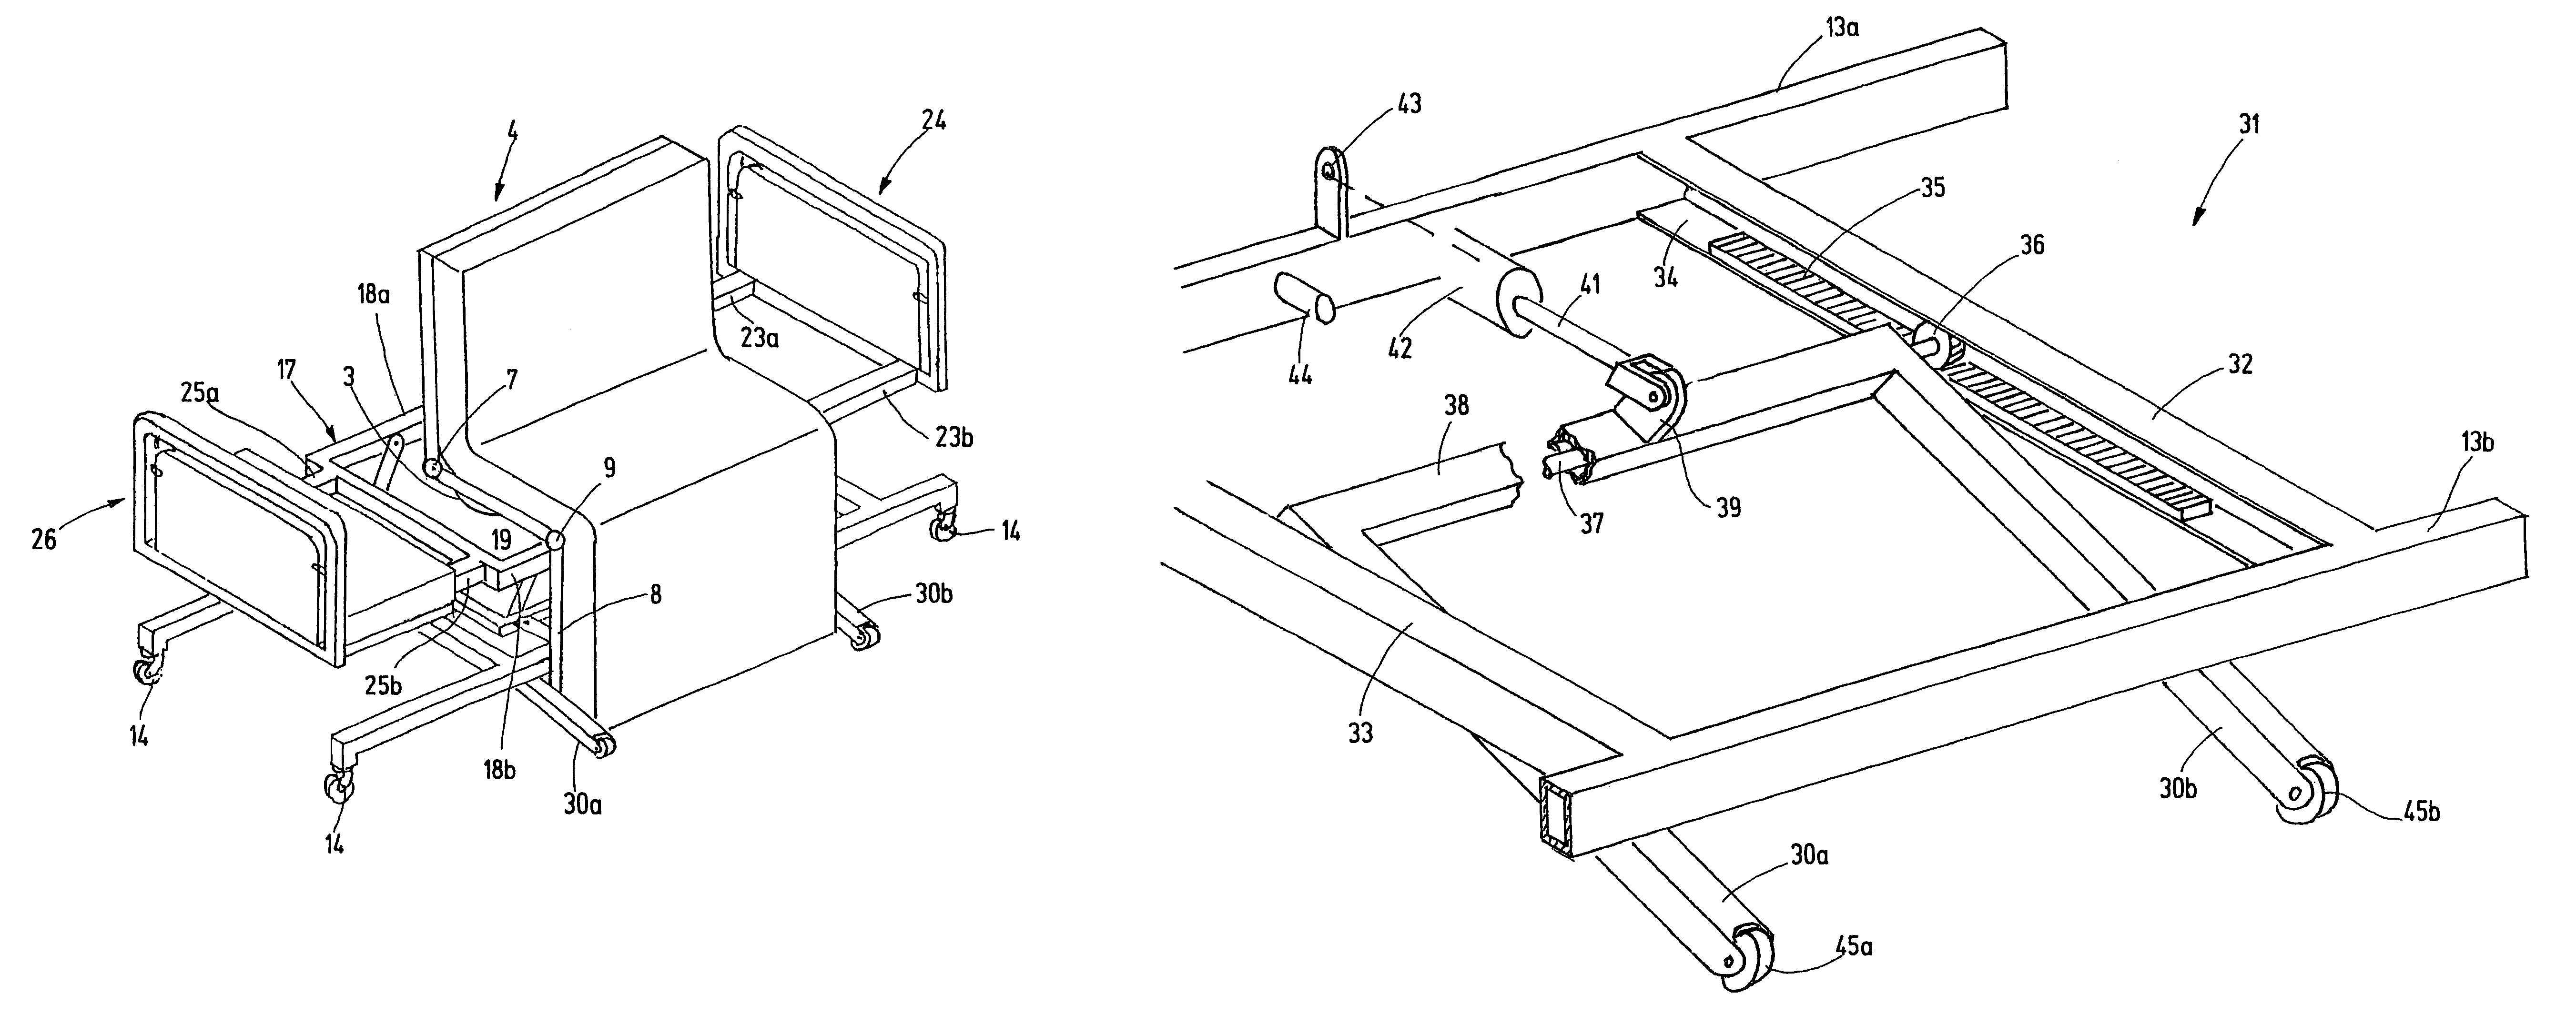 Rotating bed with improved stability